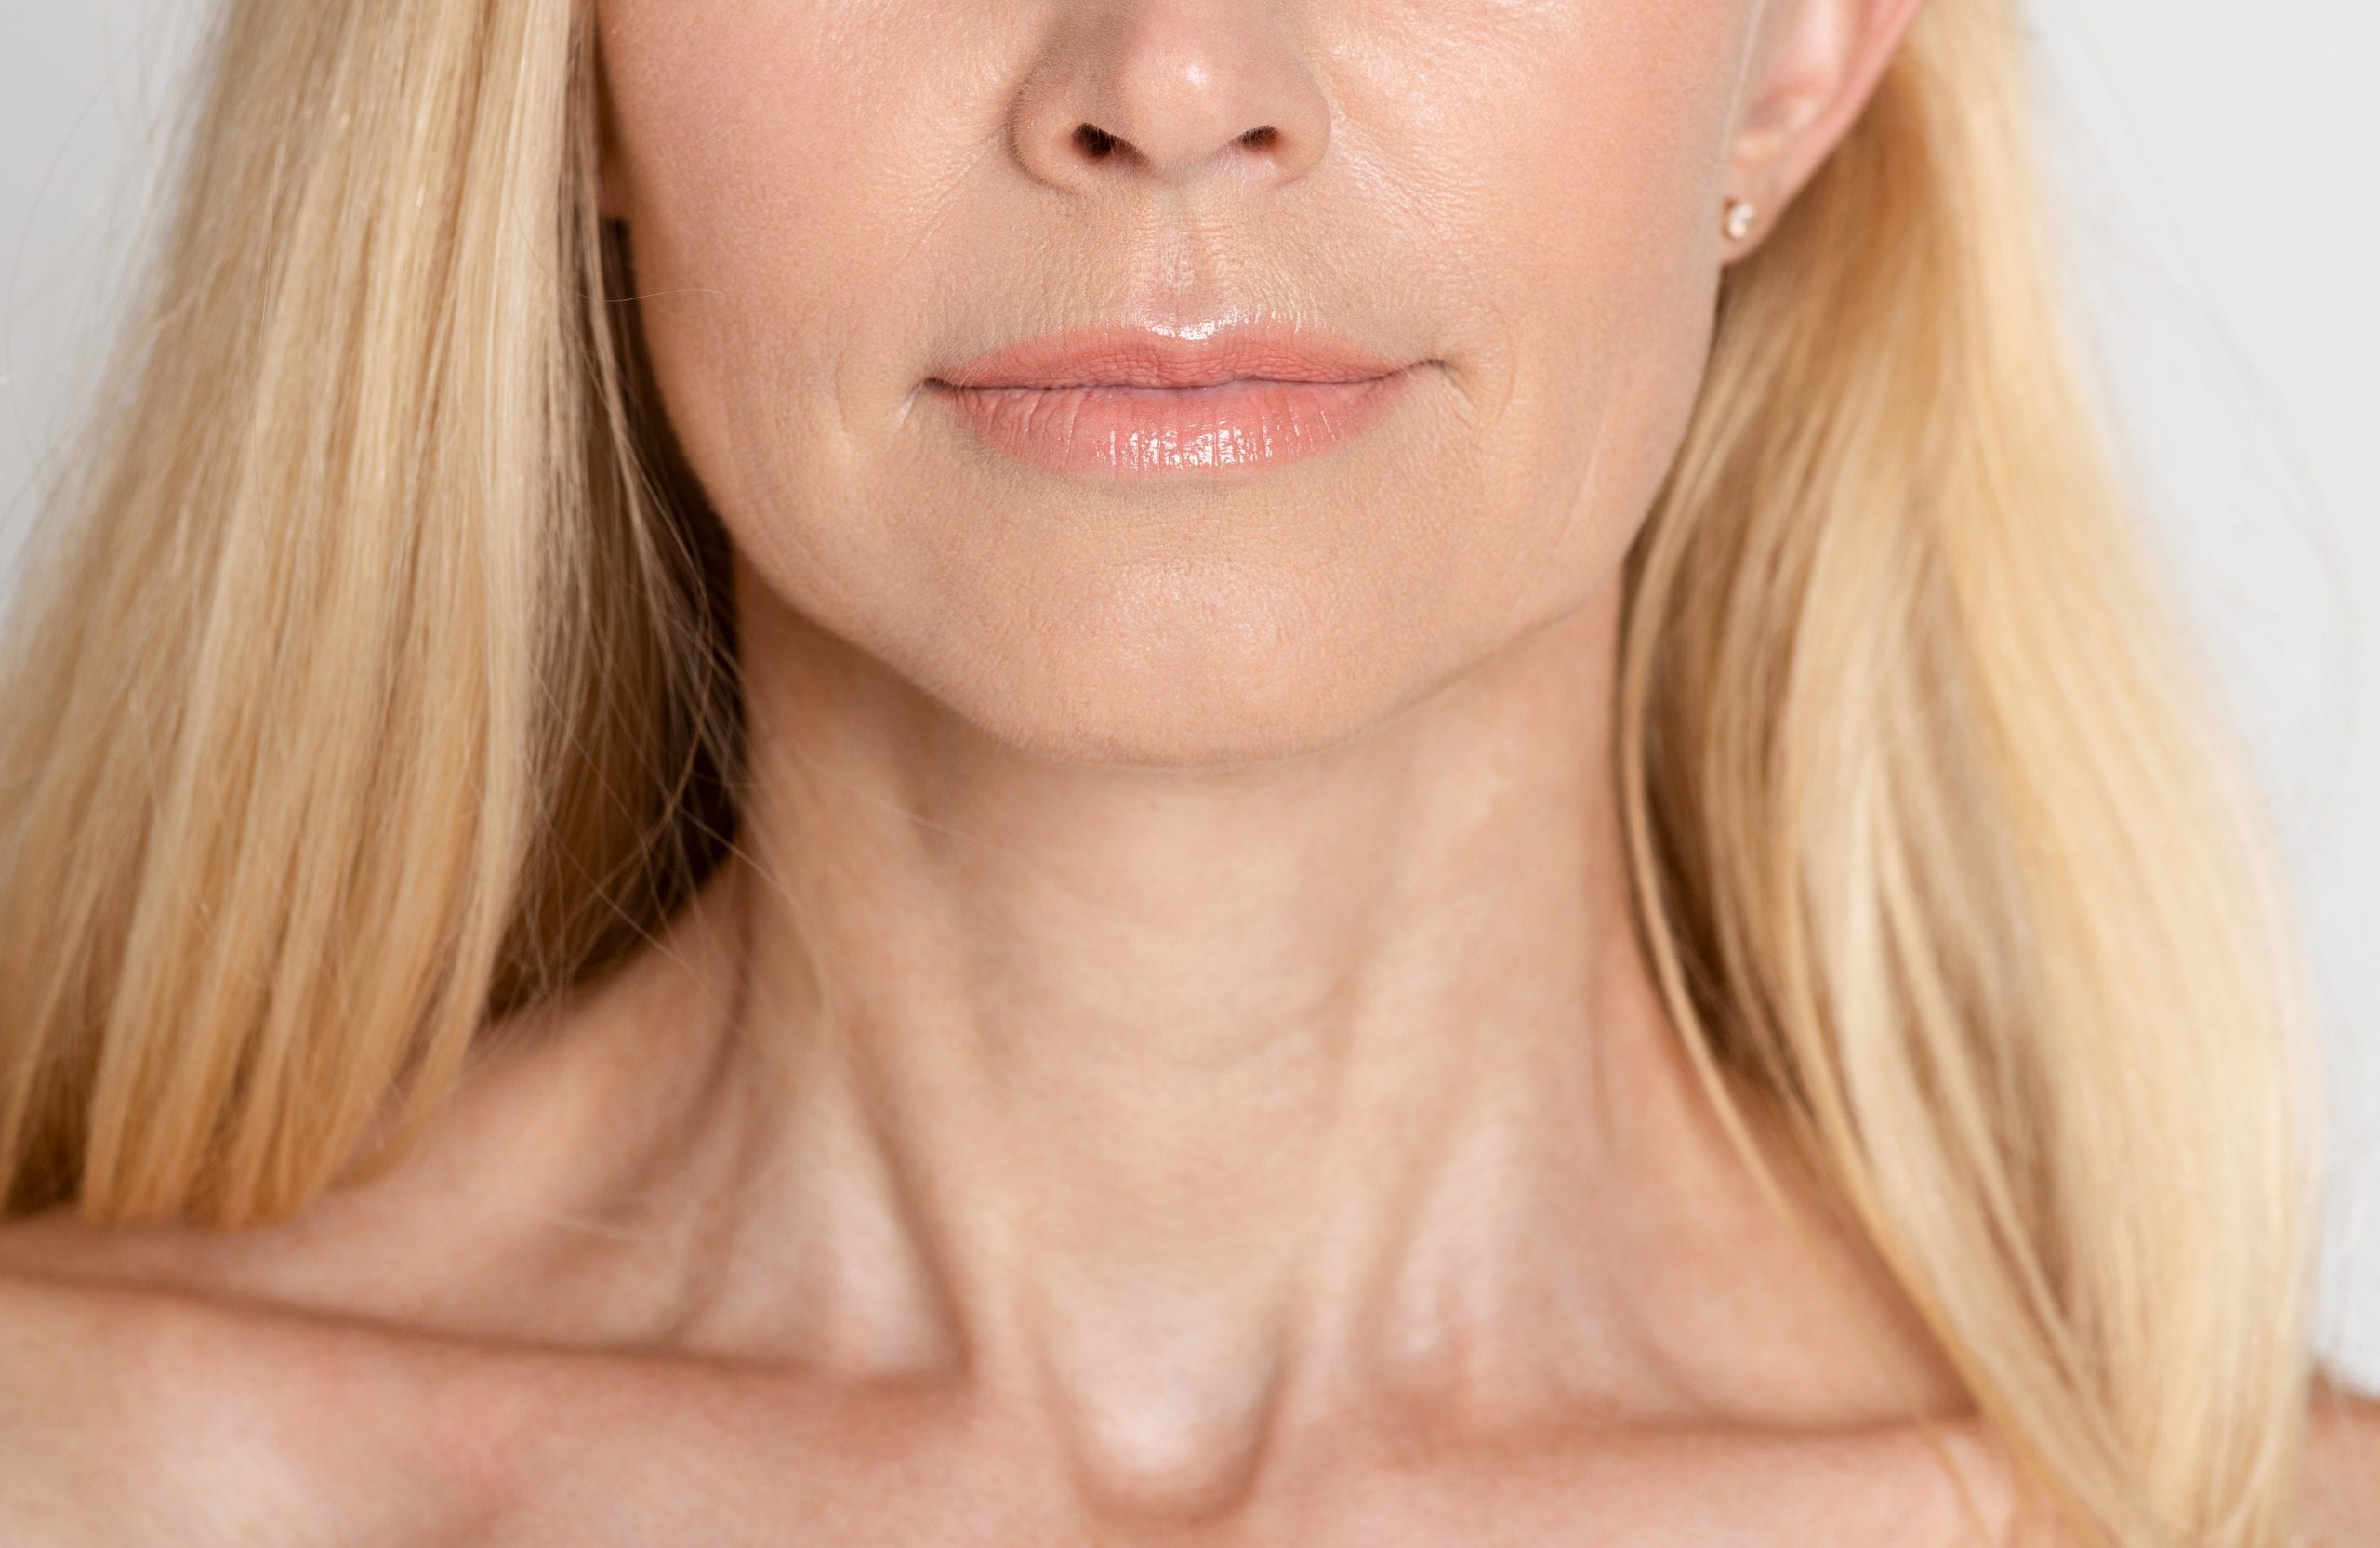 How To Get Rid Of Jowls With Filler